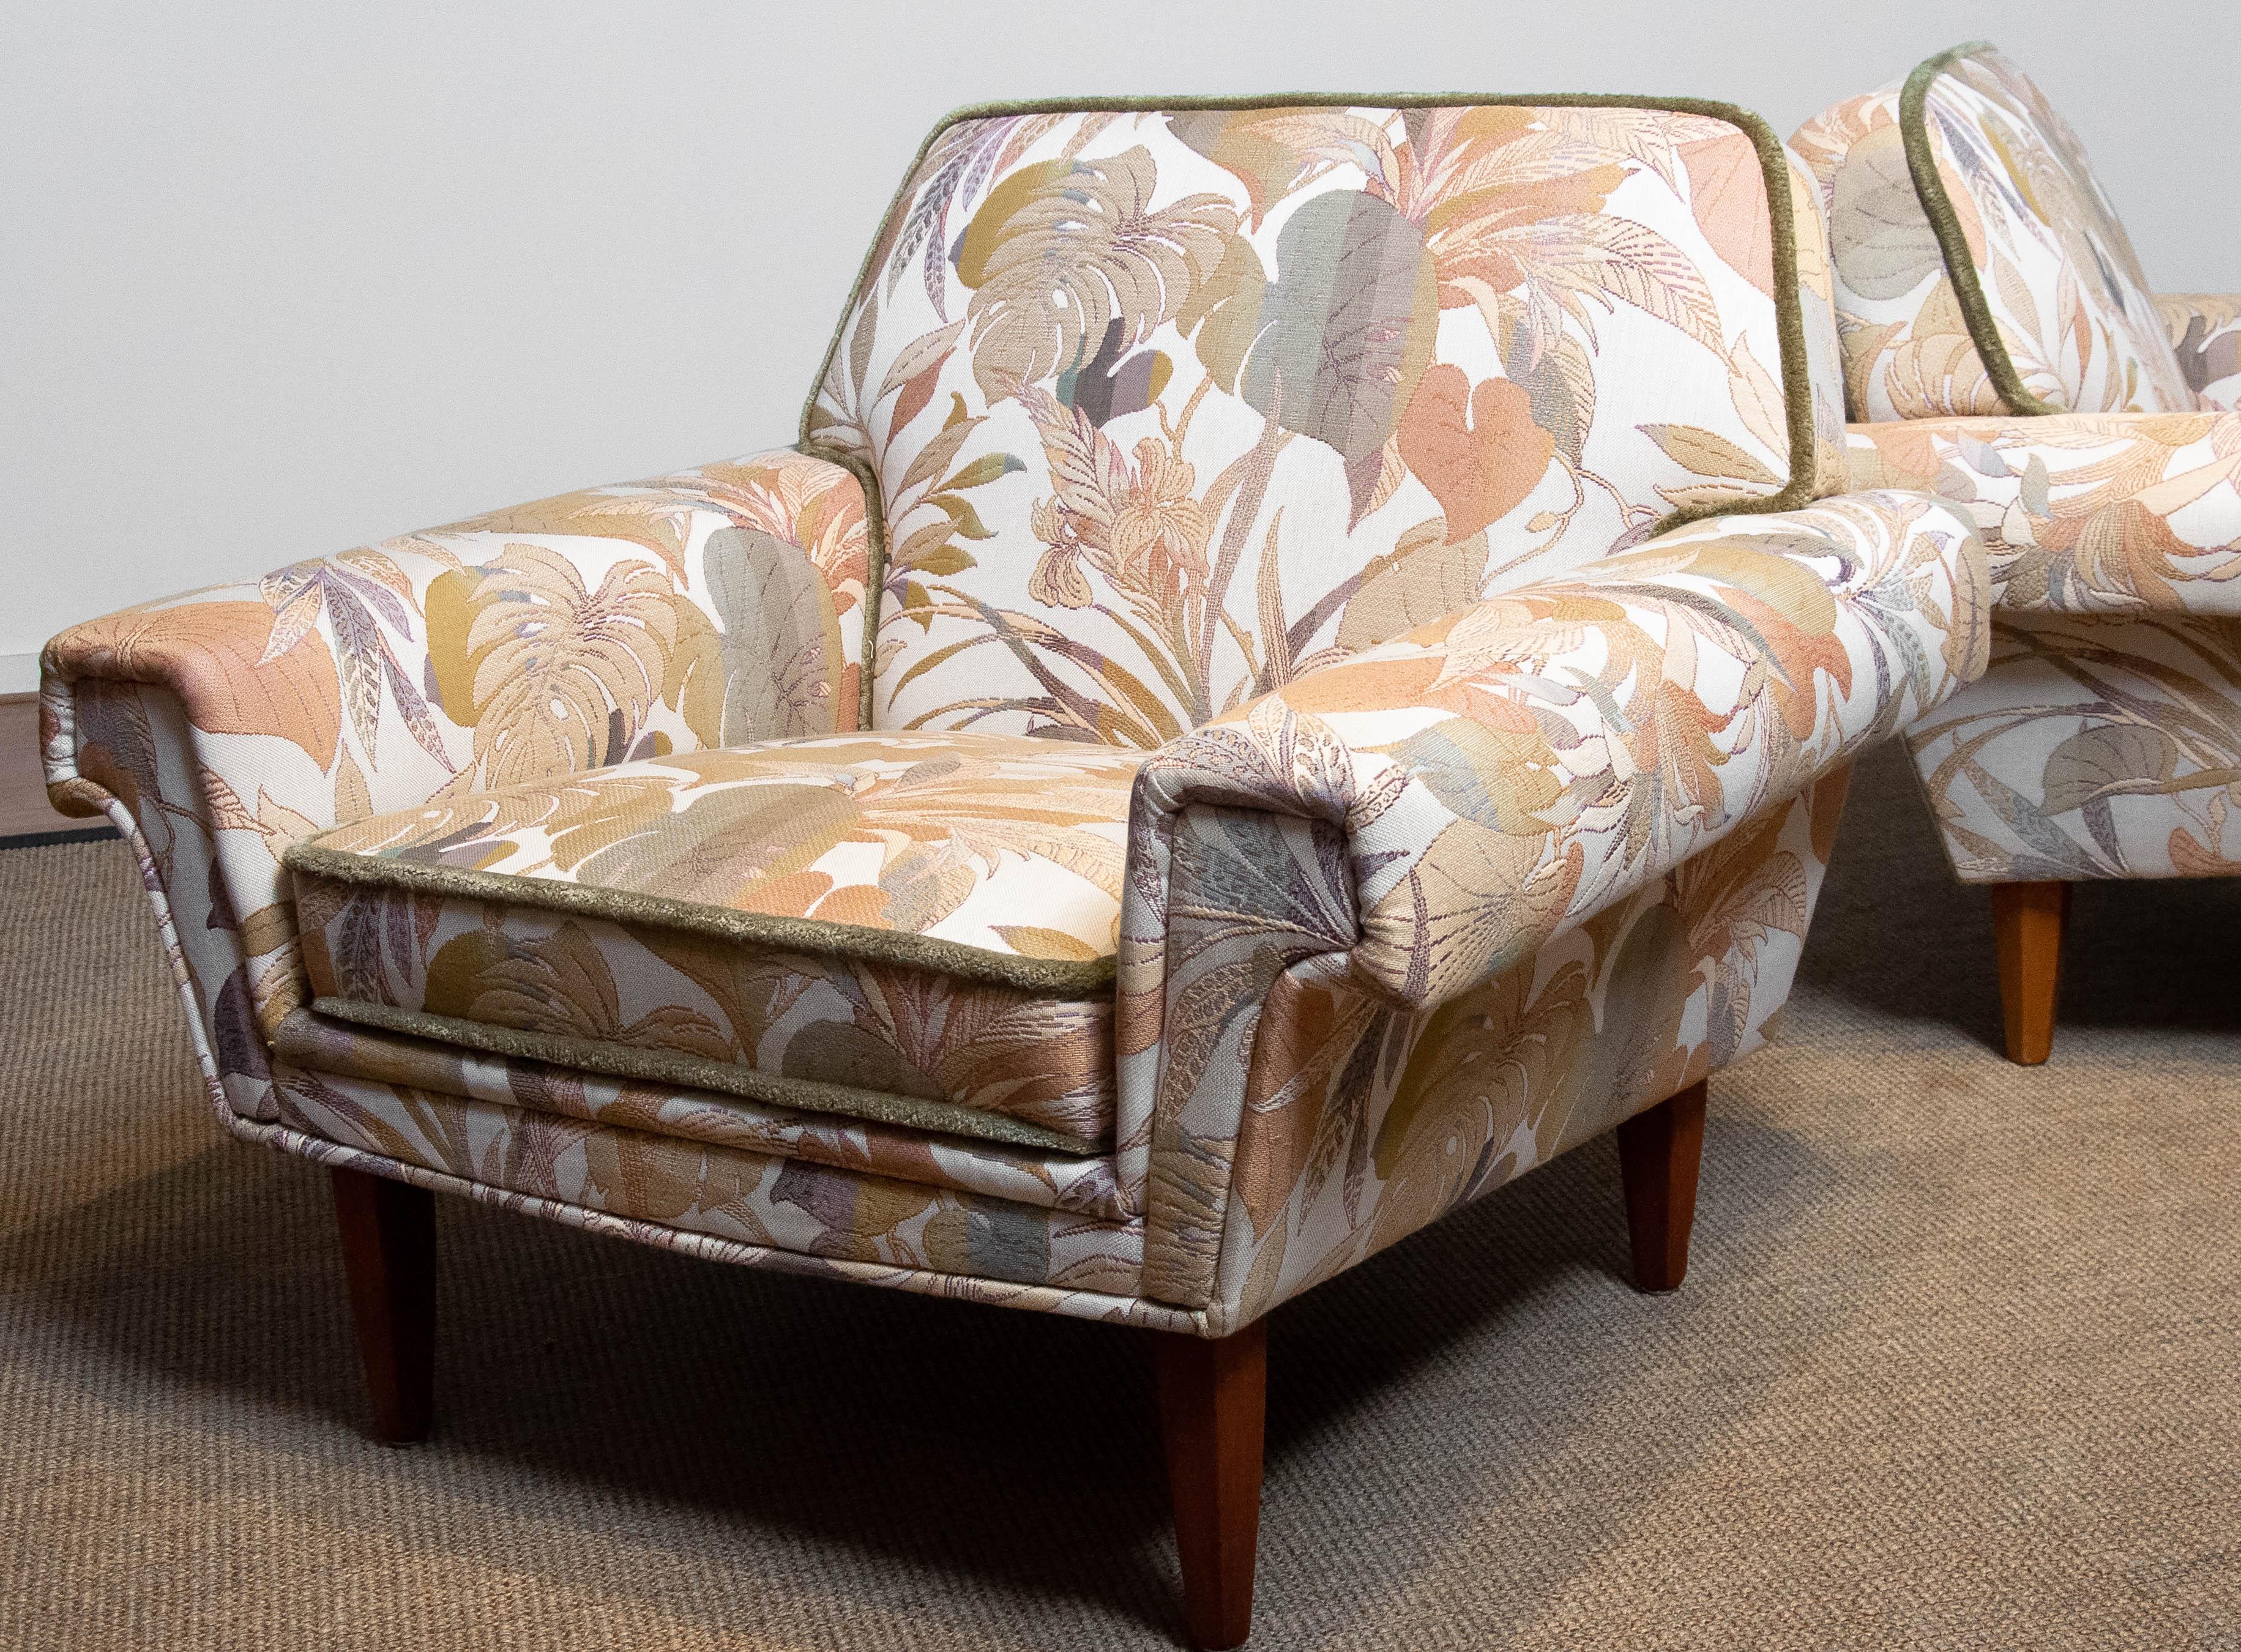 Pair Low Back Lounge Chairs Upholstered Floral Jacquard Fabric From Denmark 1970 For Sale 2